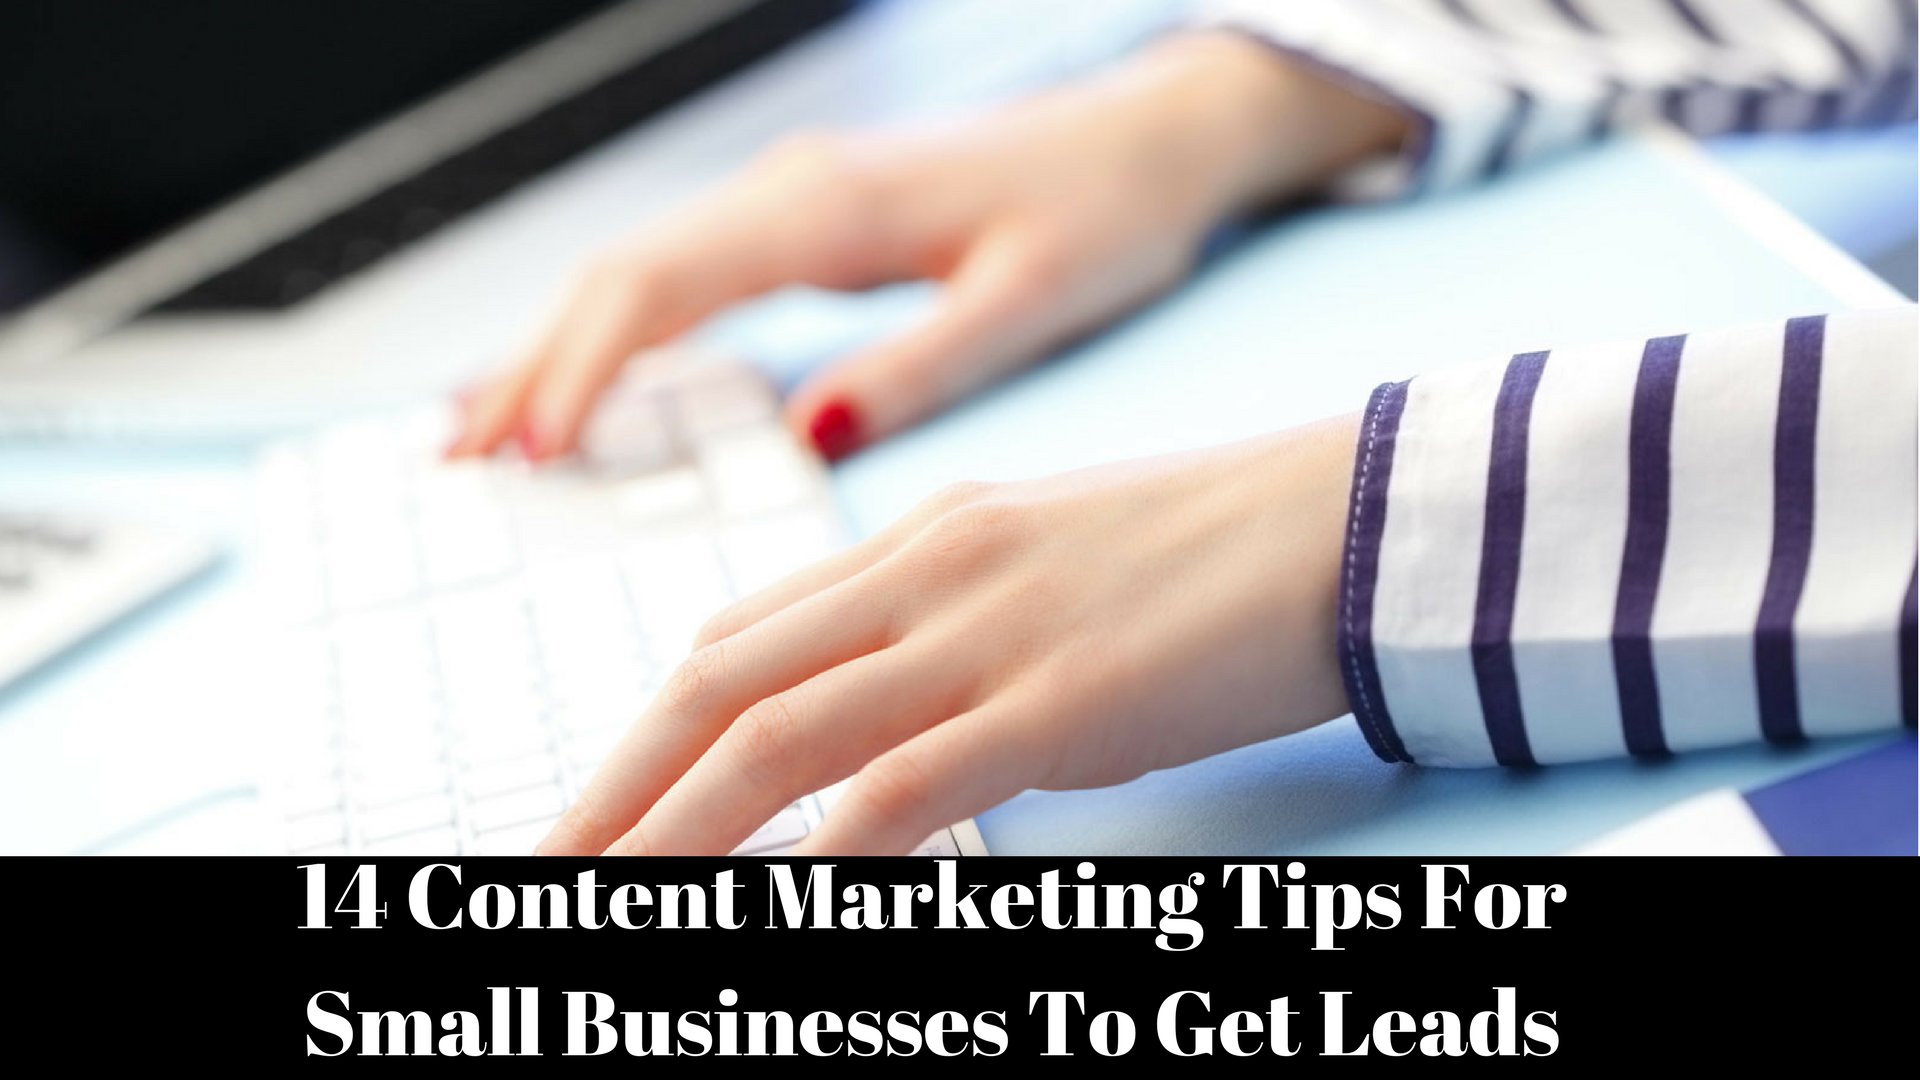 14 Content Marketing Tips for Small Businesses to Get Leads